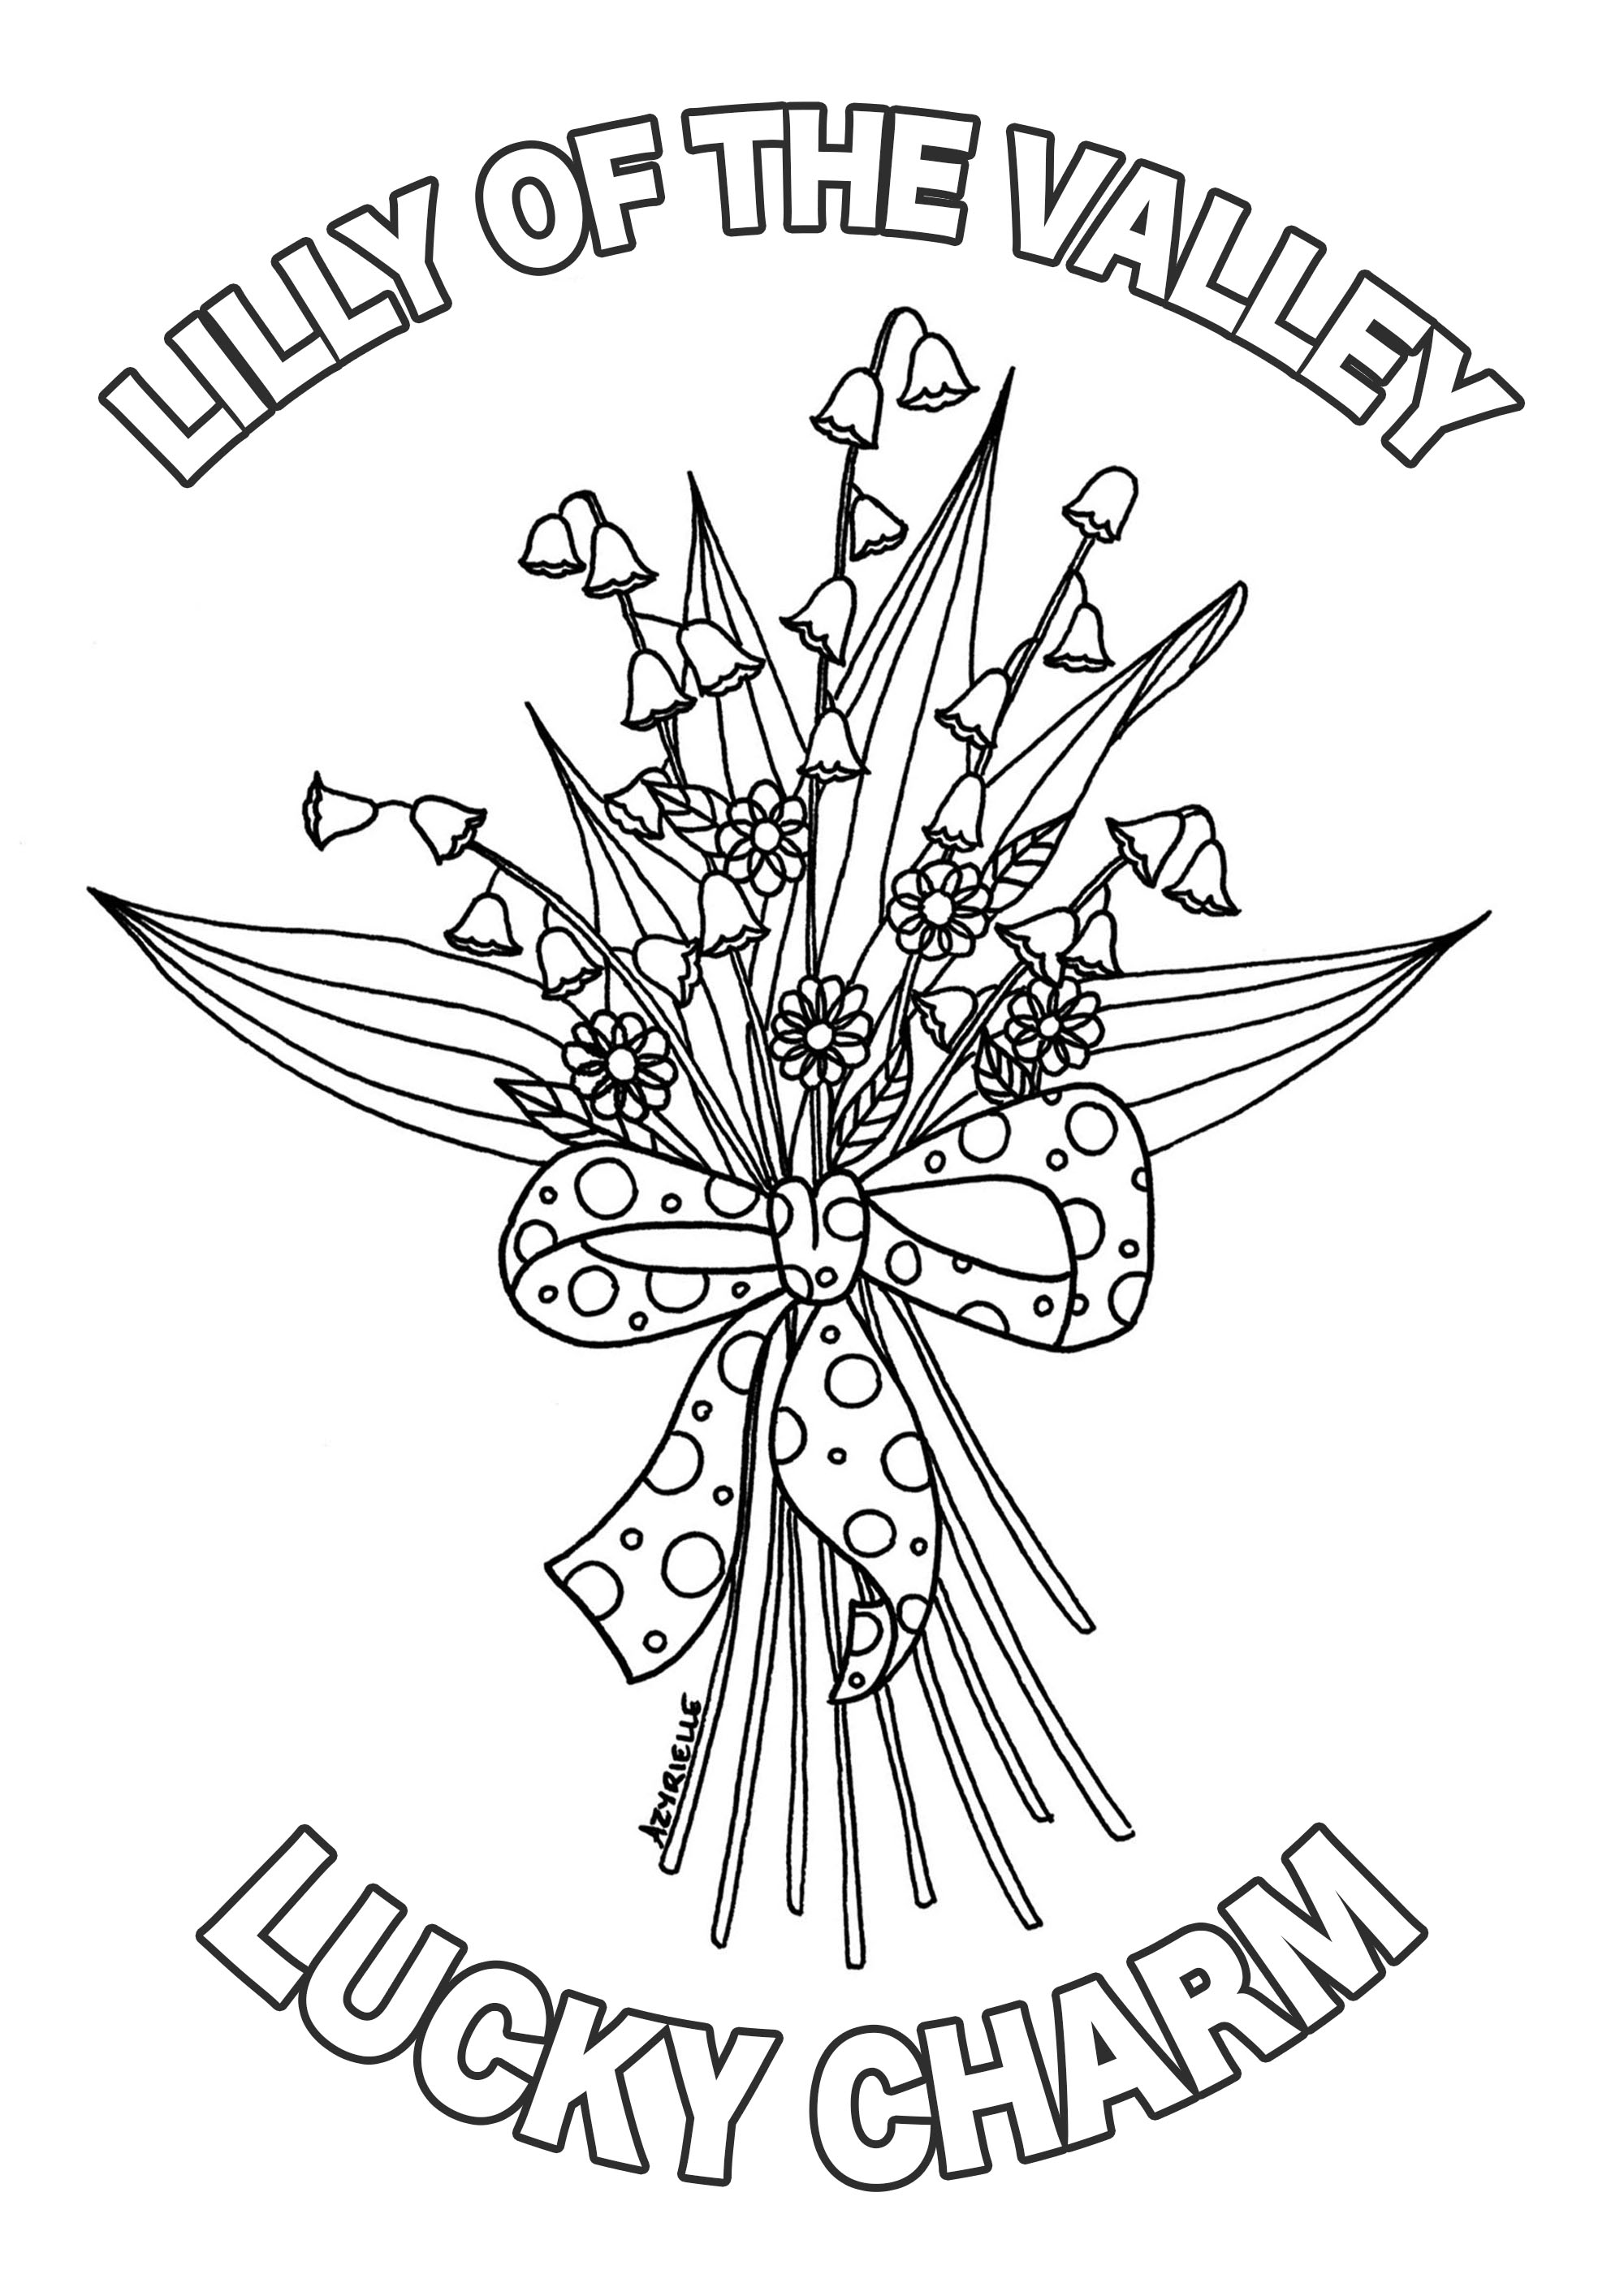 Lilly of the valley : Coloring page with text, Artist : Azyrielle